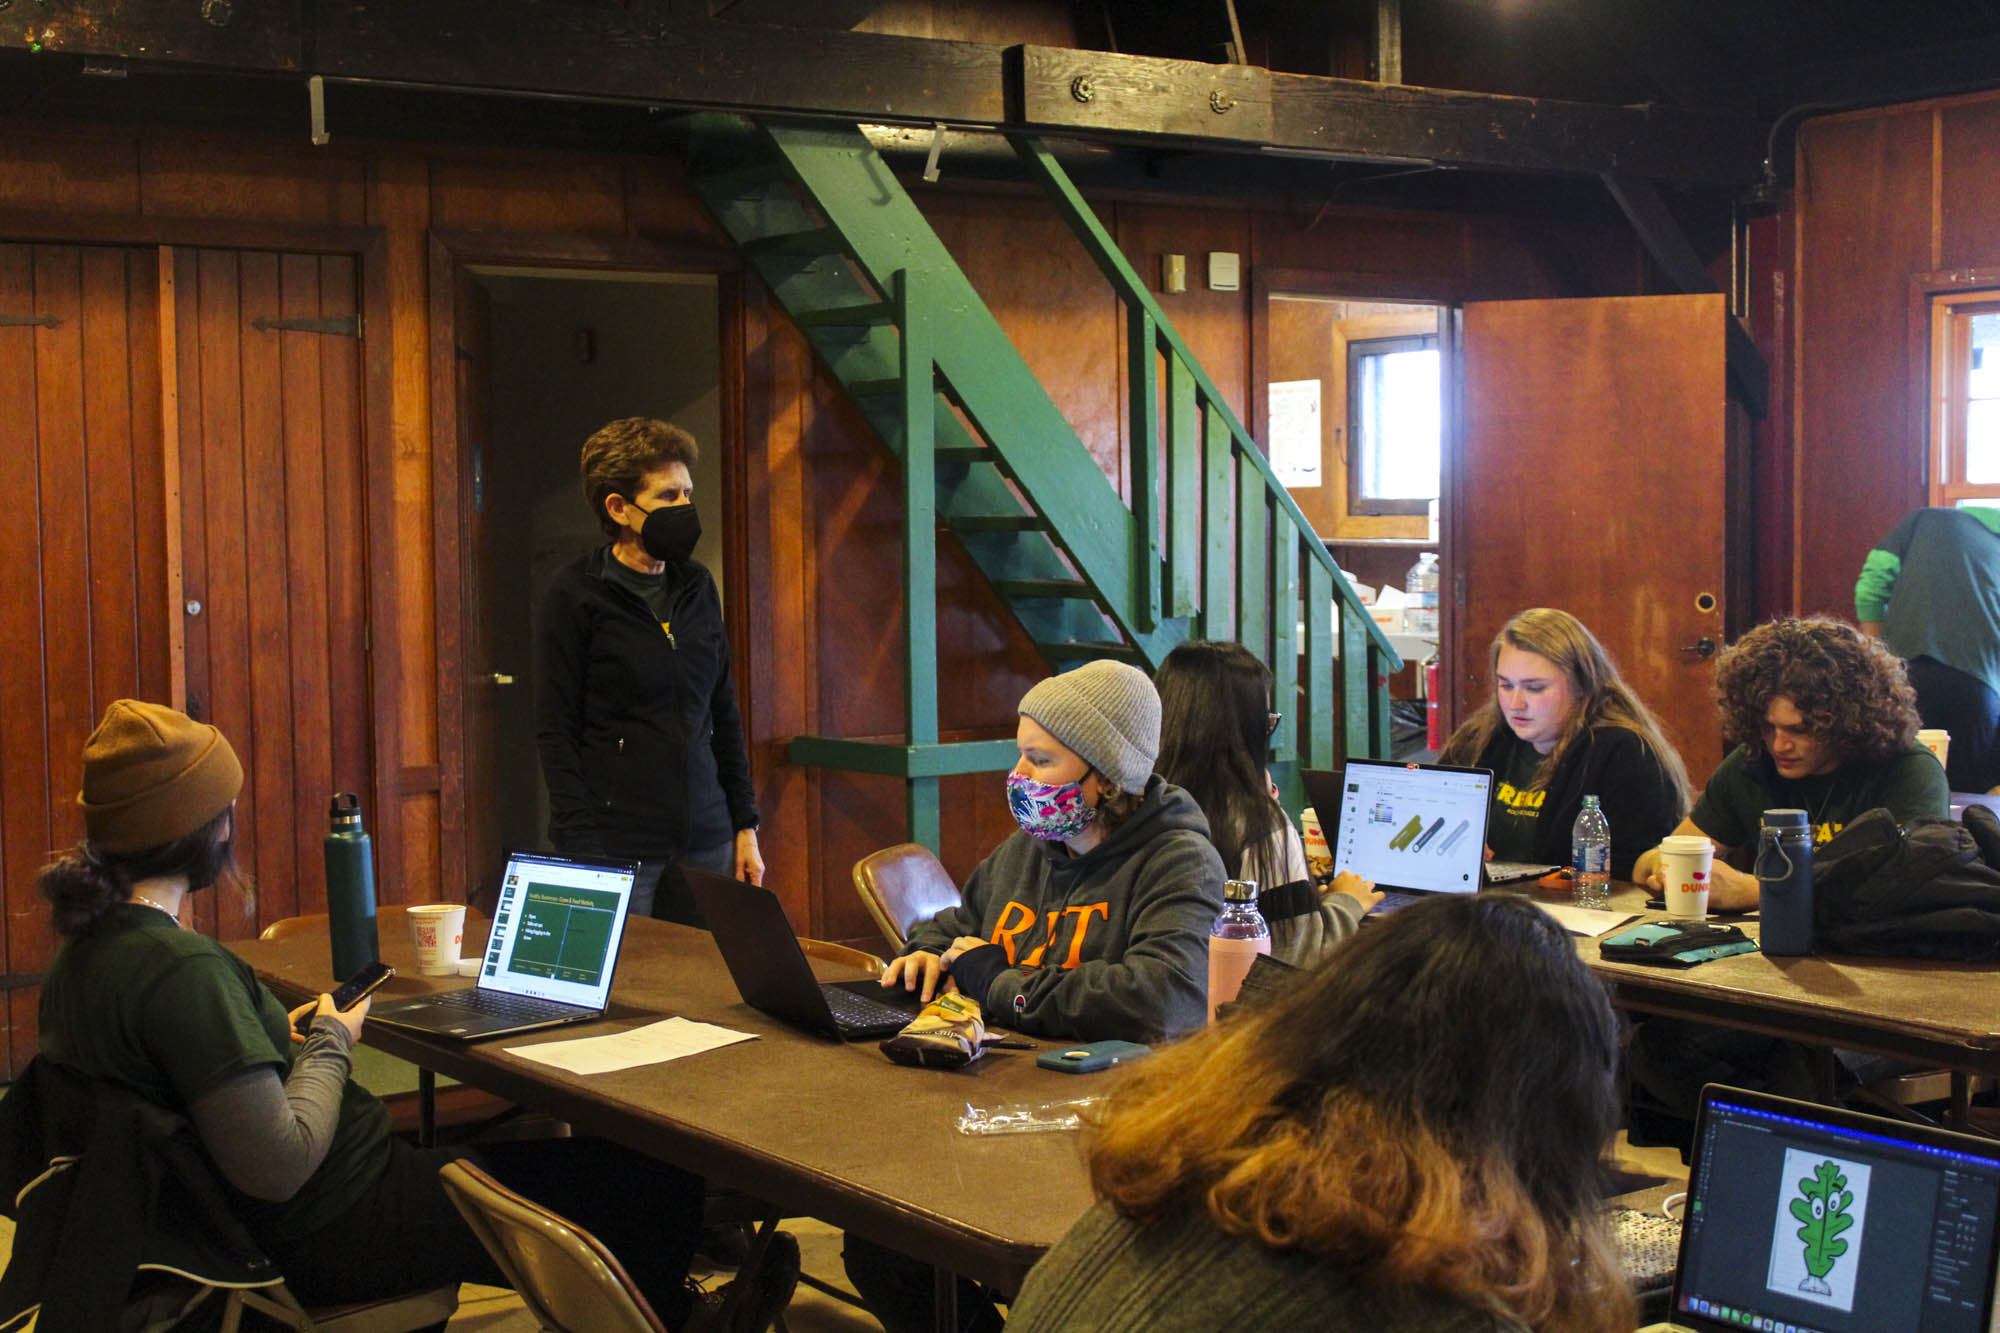 Students work on computers in a park lodge.